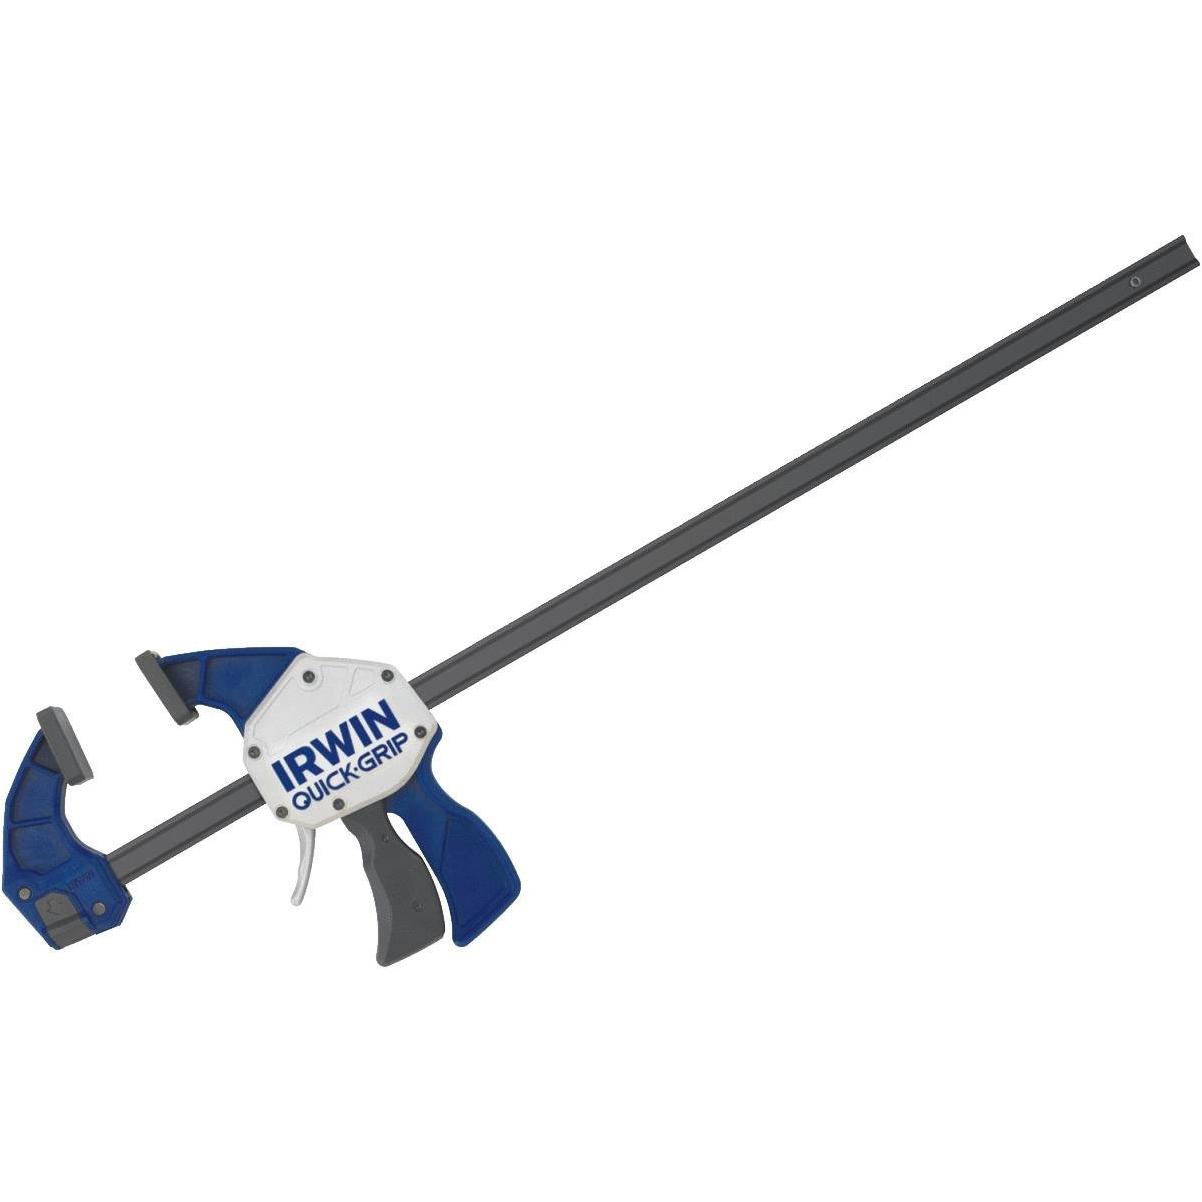 IRWIN Tools Quick-grip Xp600 Series One-handed Bar Clamp and Spreader 24in for sale online 